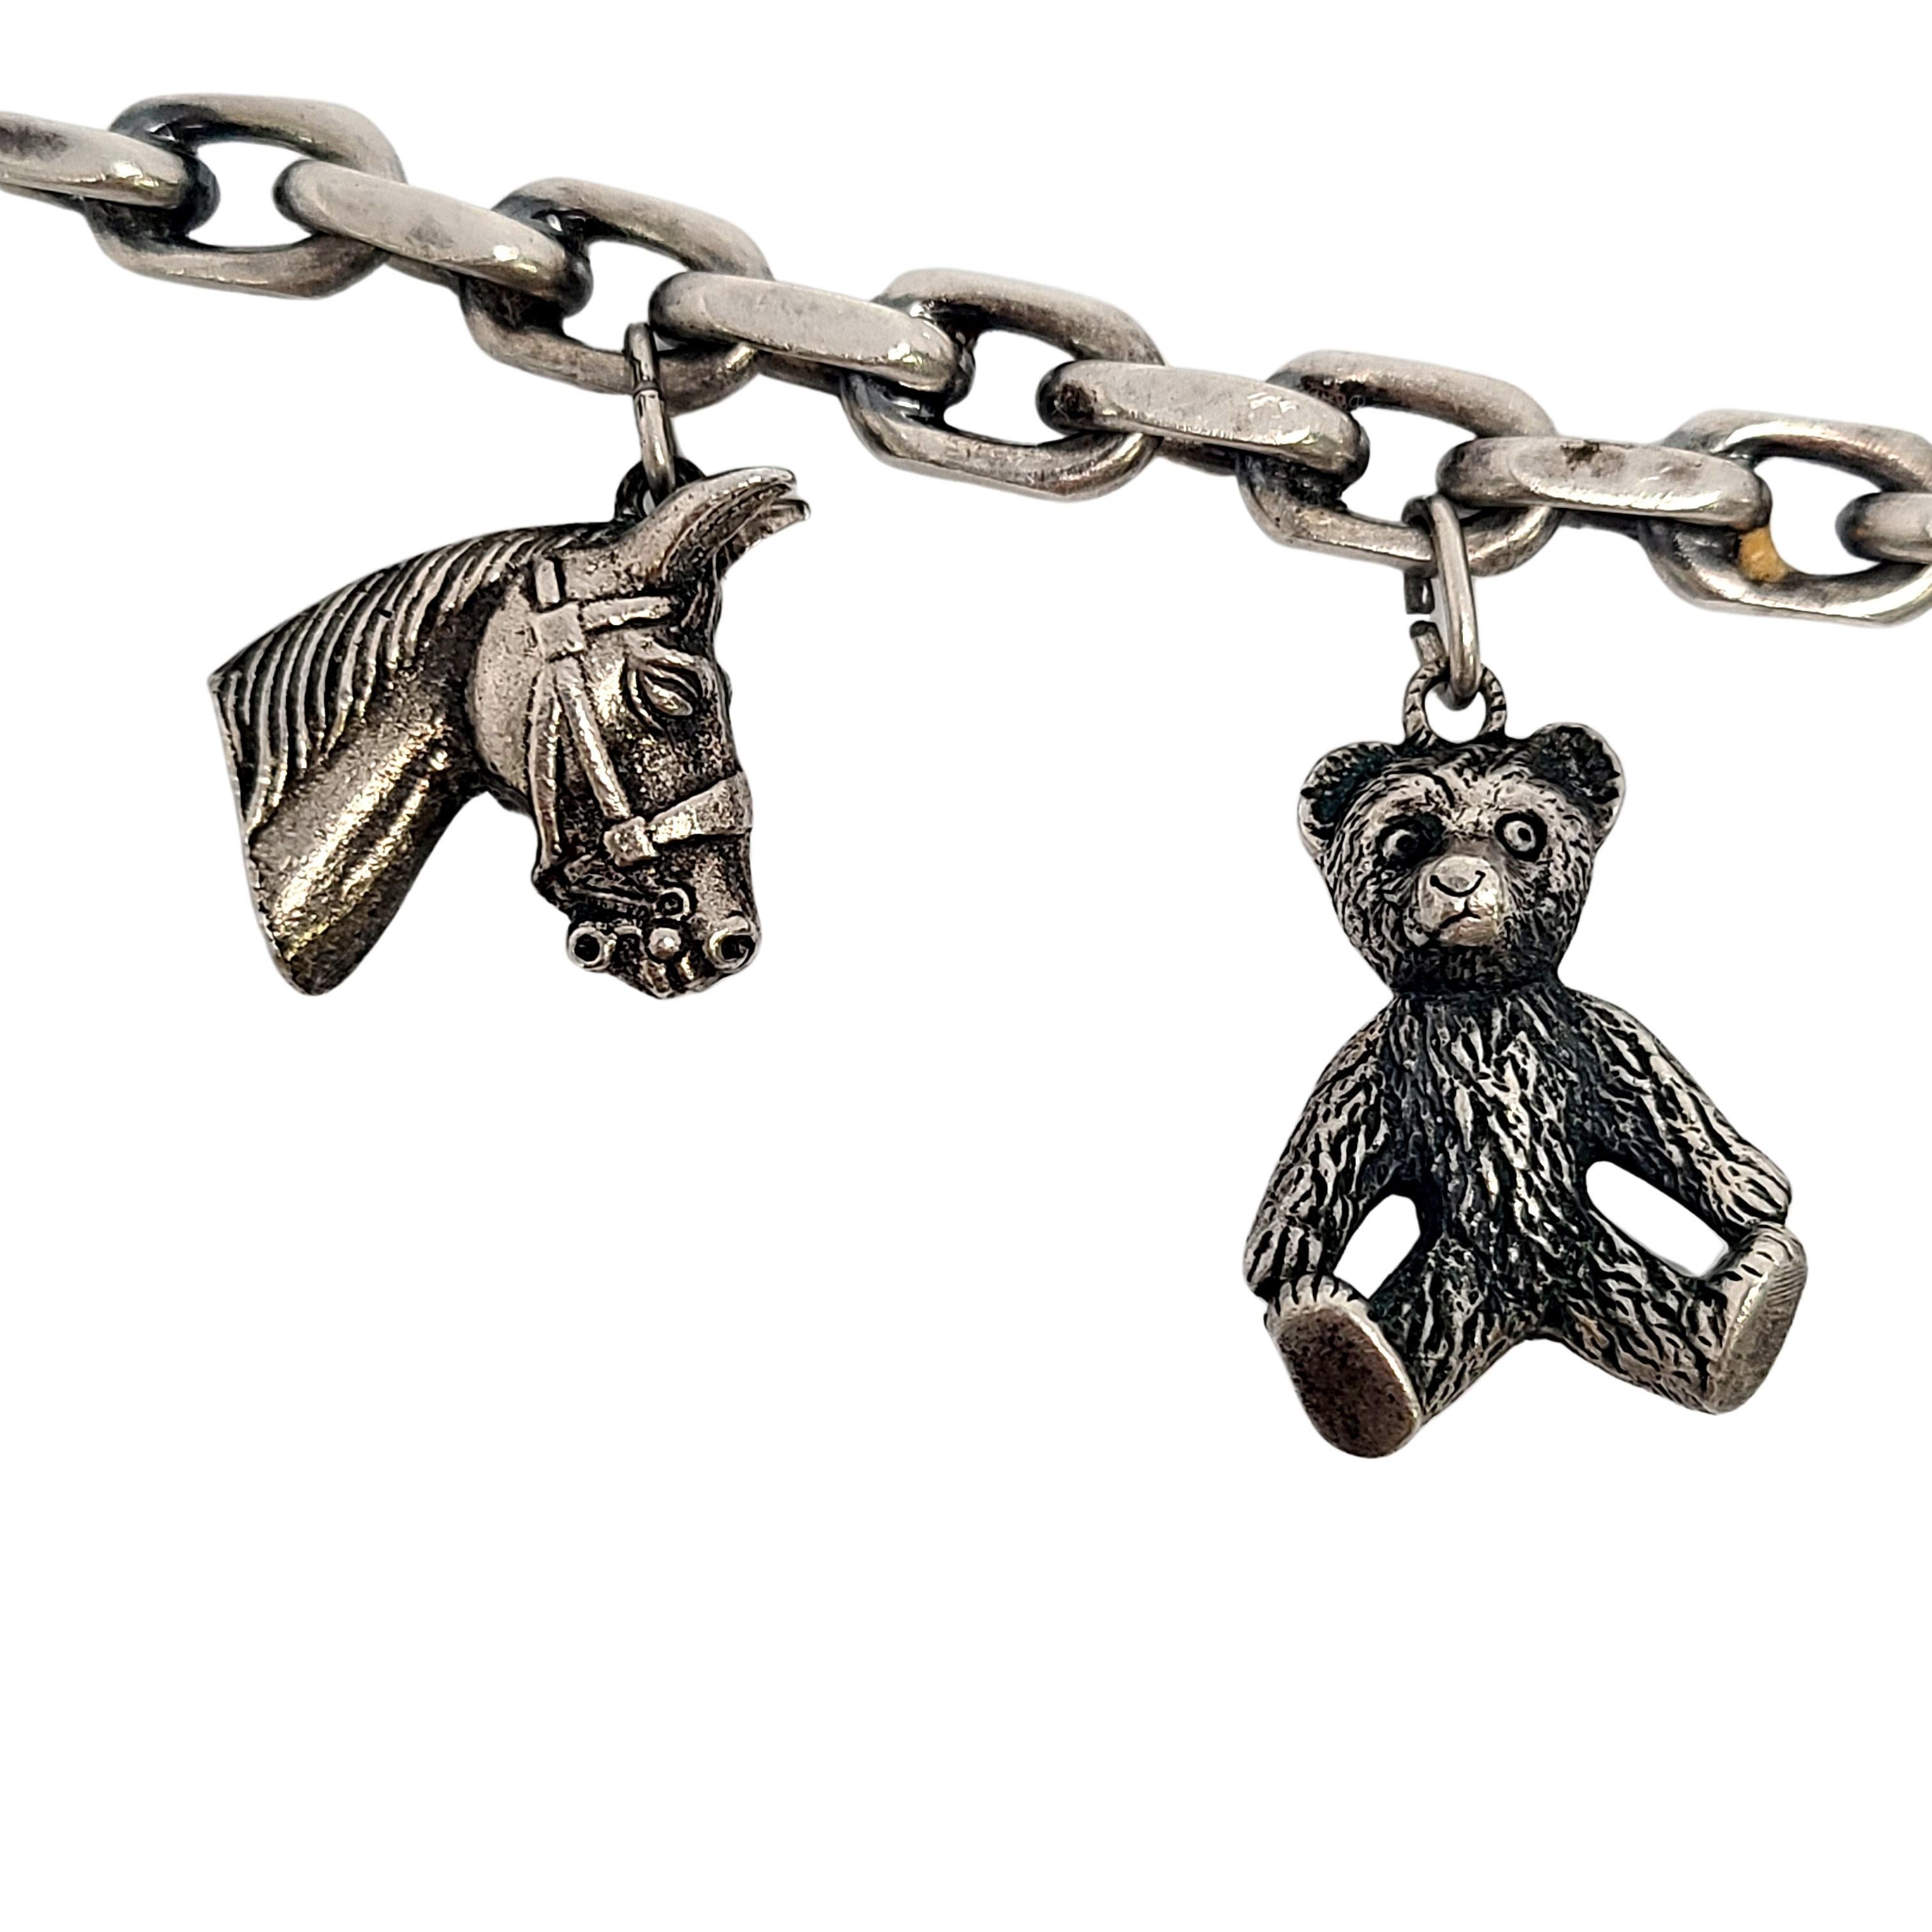 800 silver charm bracelet.

Elongated oval link charm bracelet featuring 6 animal charms: horse head, teddy bear, swan, owl, monkey, and a piggy bank with a coin.

Measures approx 6 1/2